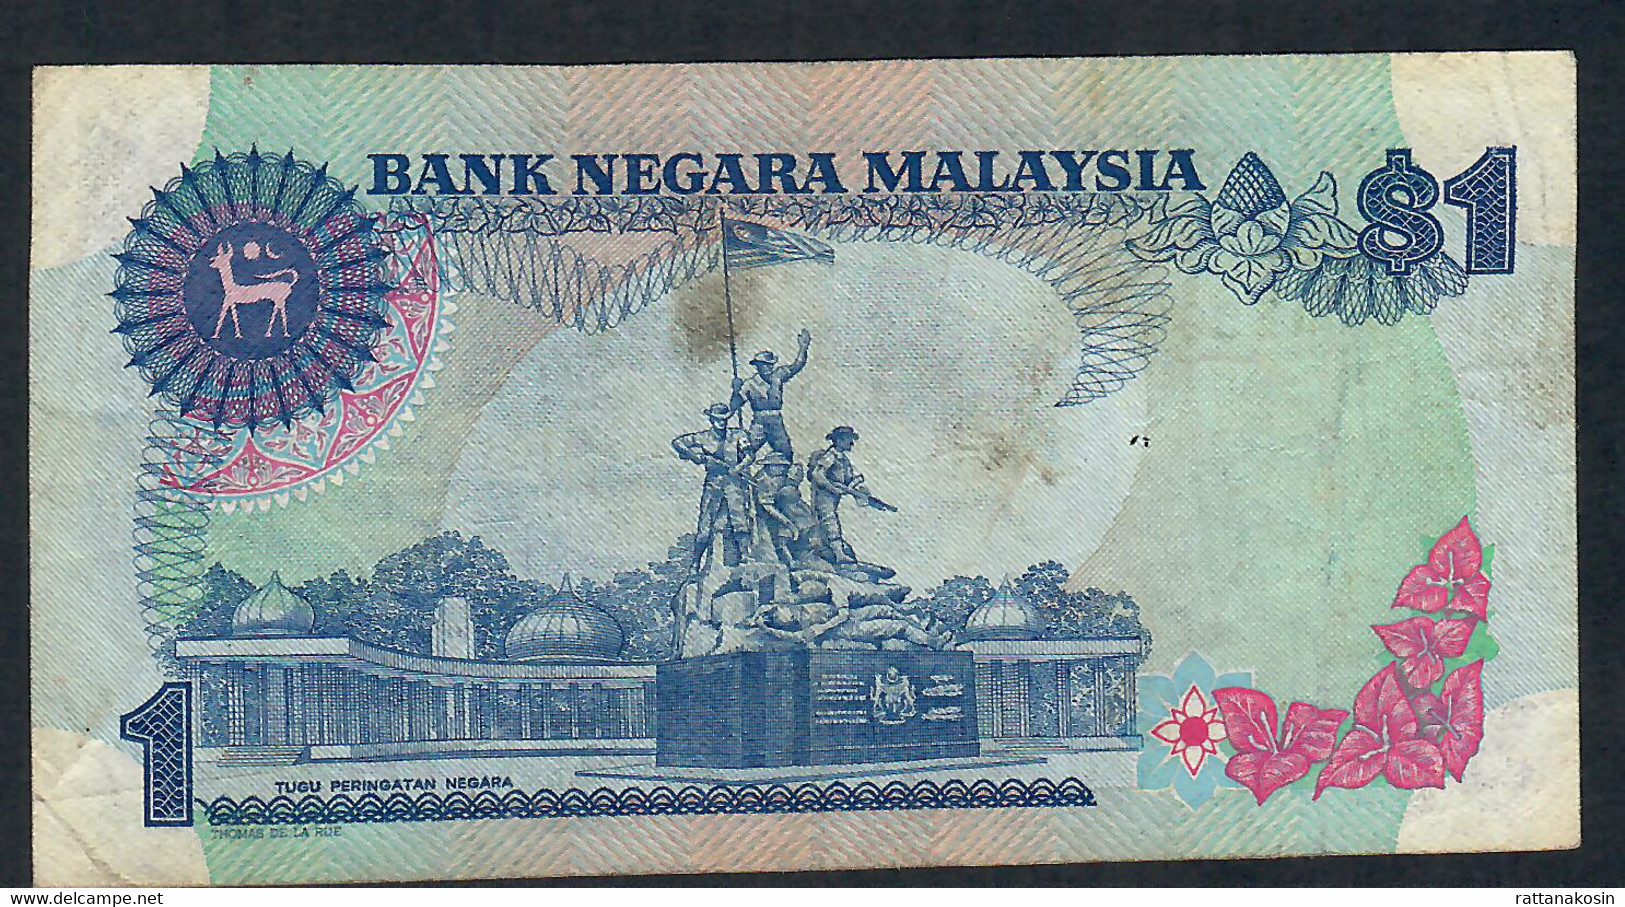 MALAYSIA  P19A 1 RINGGIT 1981 #AF  Printer TdlR RARE VARIETY  FINE++/Better  NO P.h.  ! ! - Malaysie